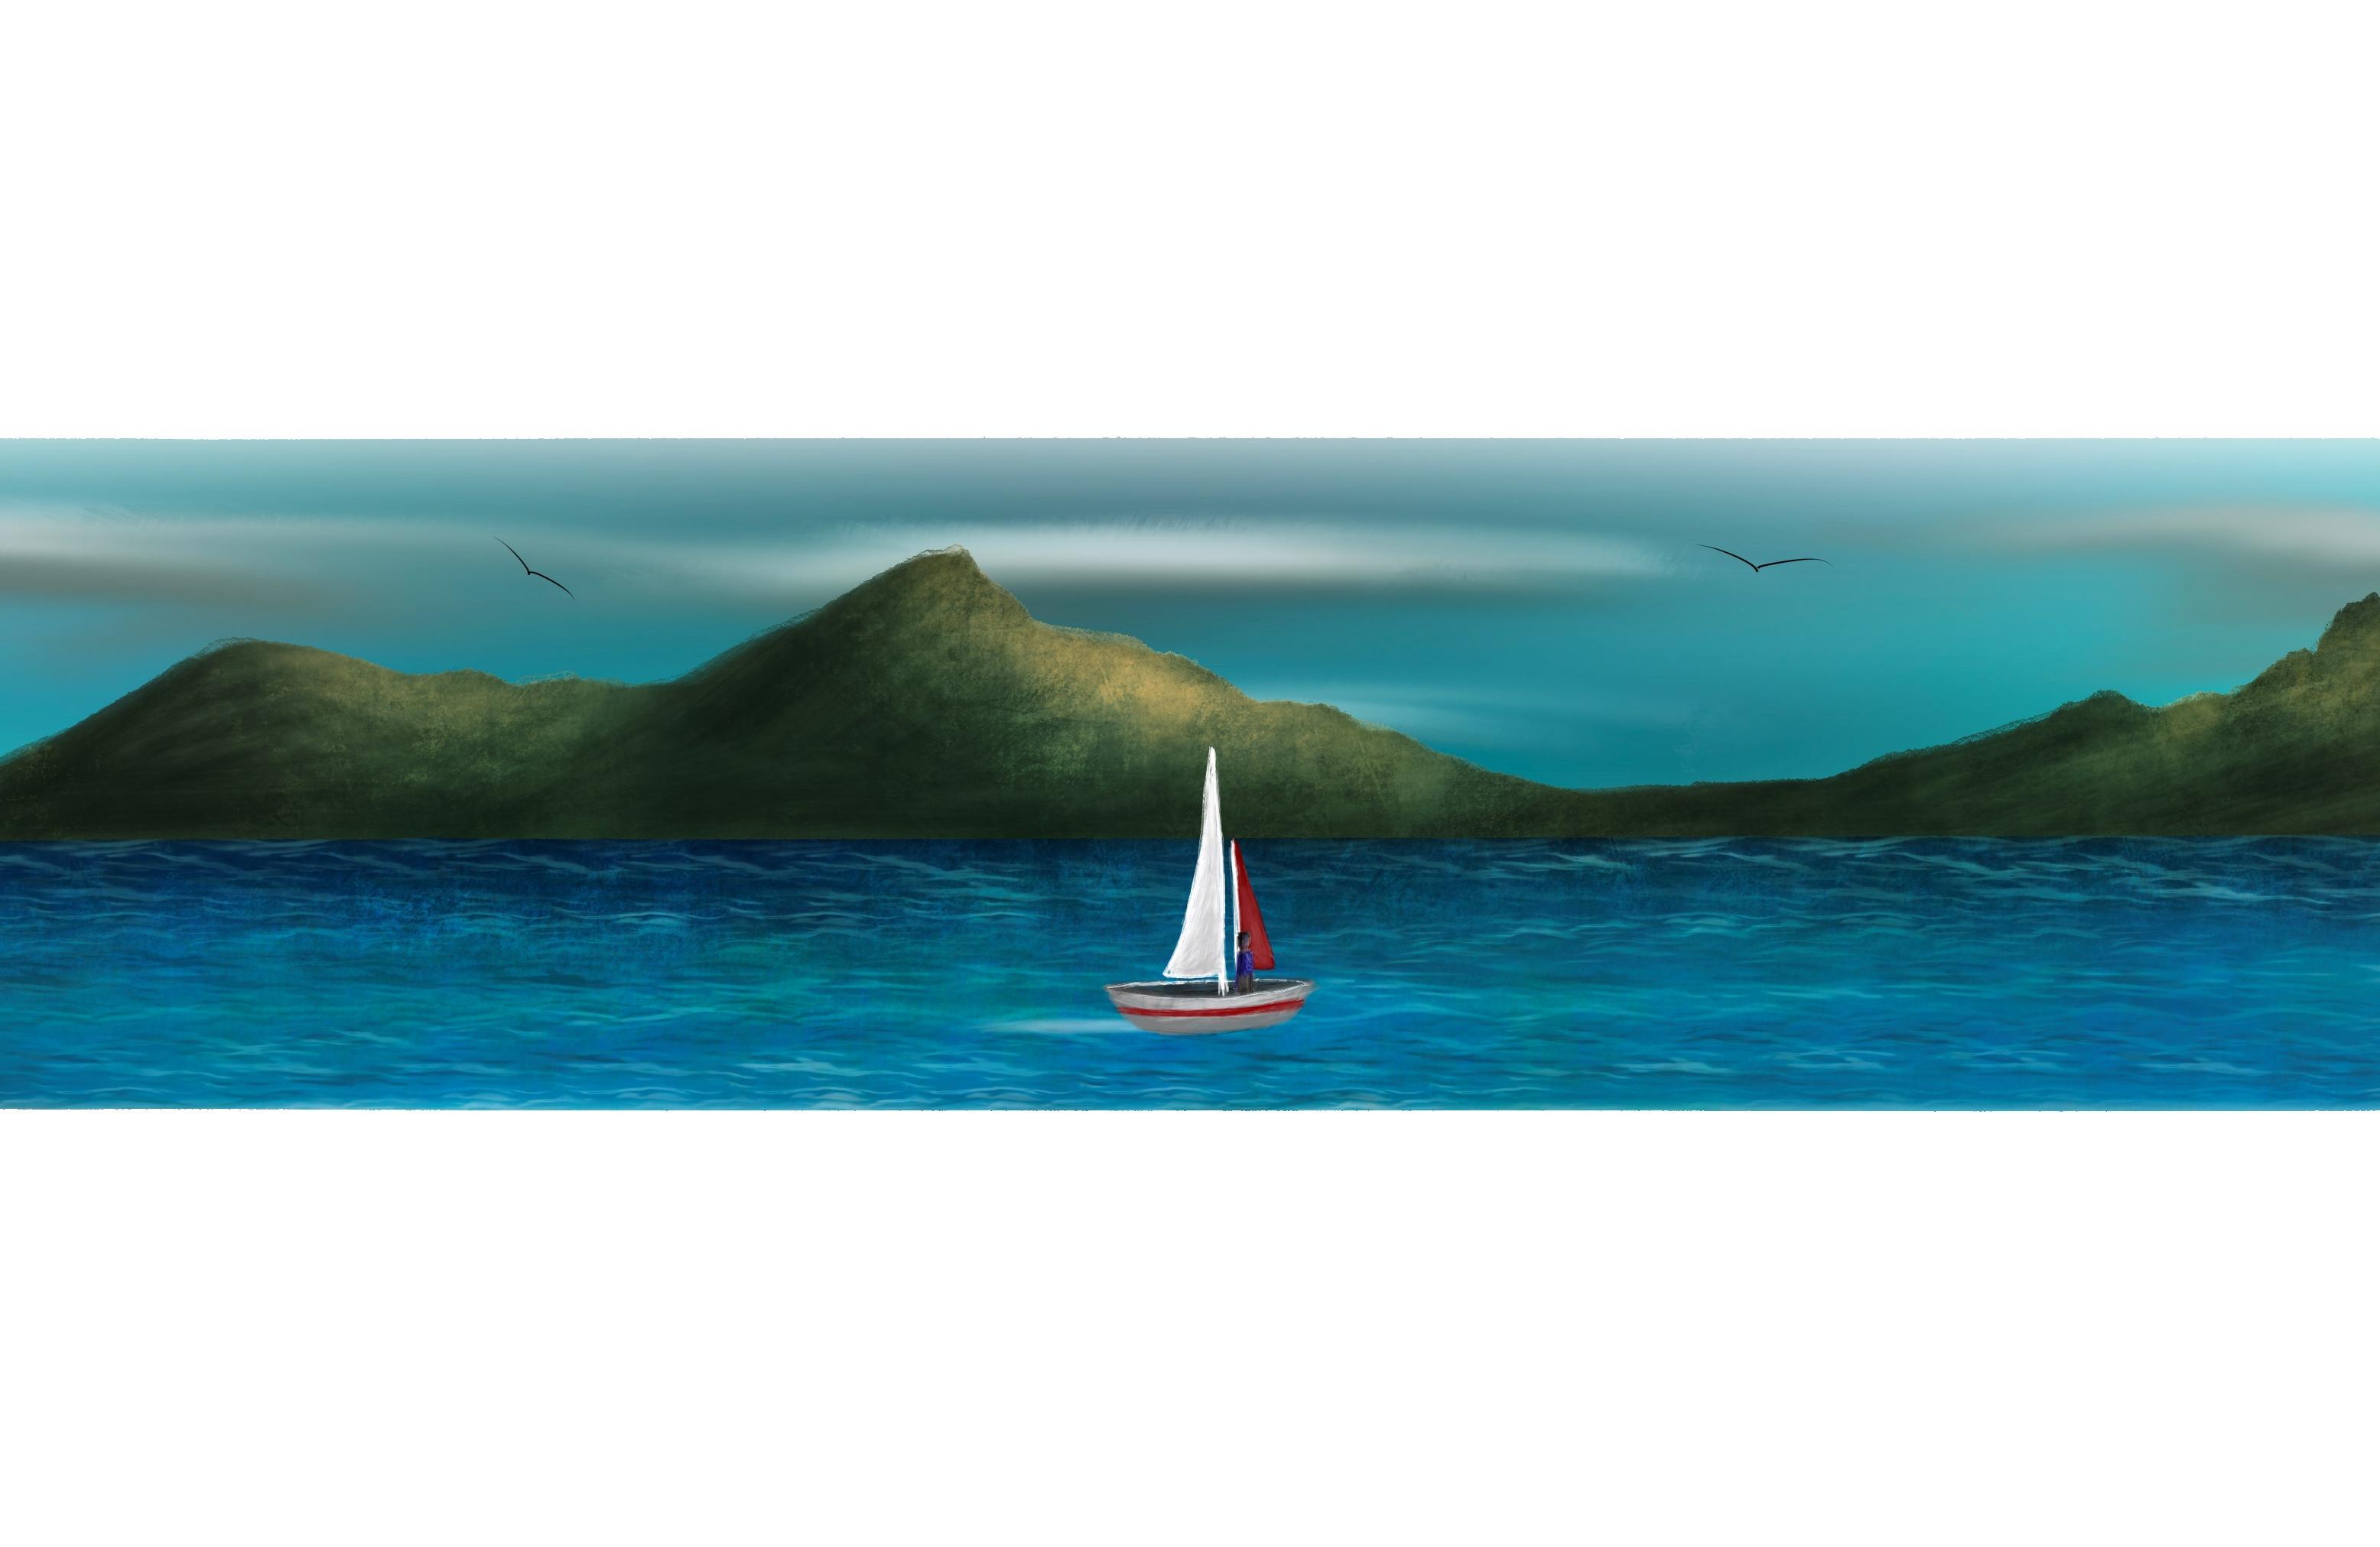 A digital painting by Lily Bourne printed on eco fine art paper titled Just Breath 1.2 showing a landshape view of a sail boat with one person sailing on open water with mountains behinds and birds flying above.